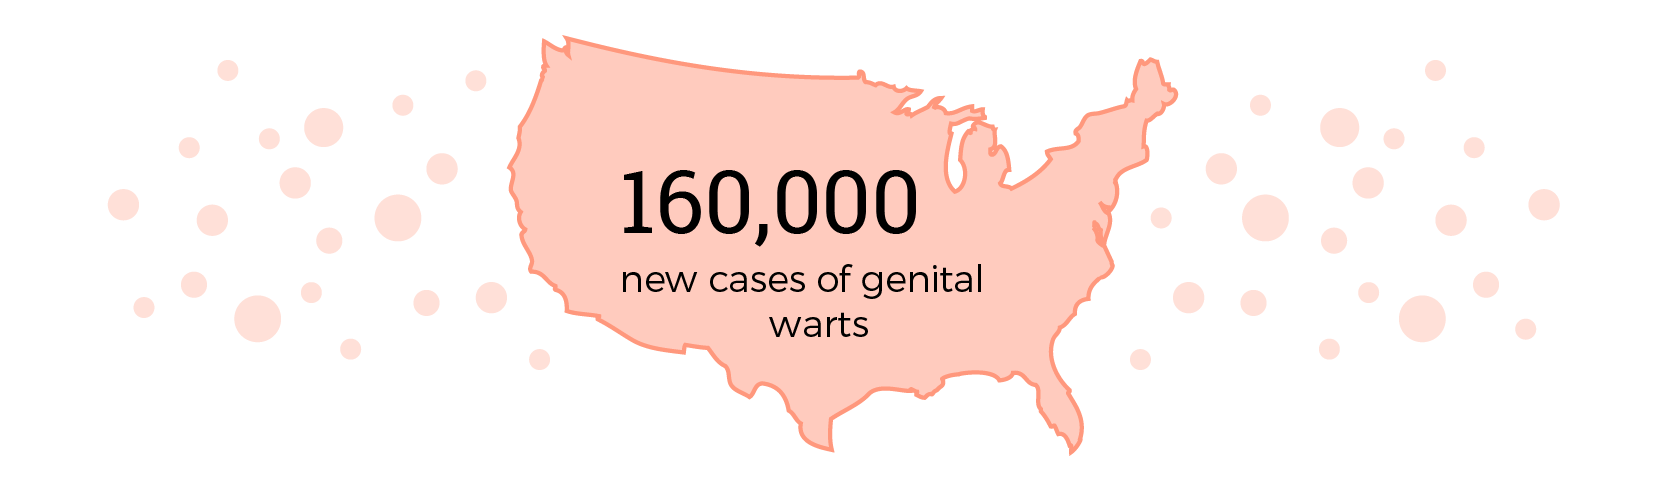 160000 new cases of genital warts